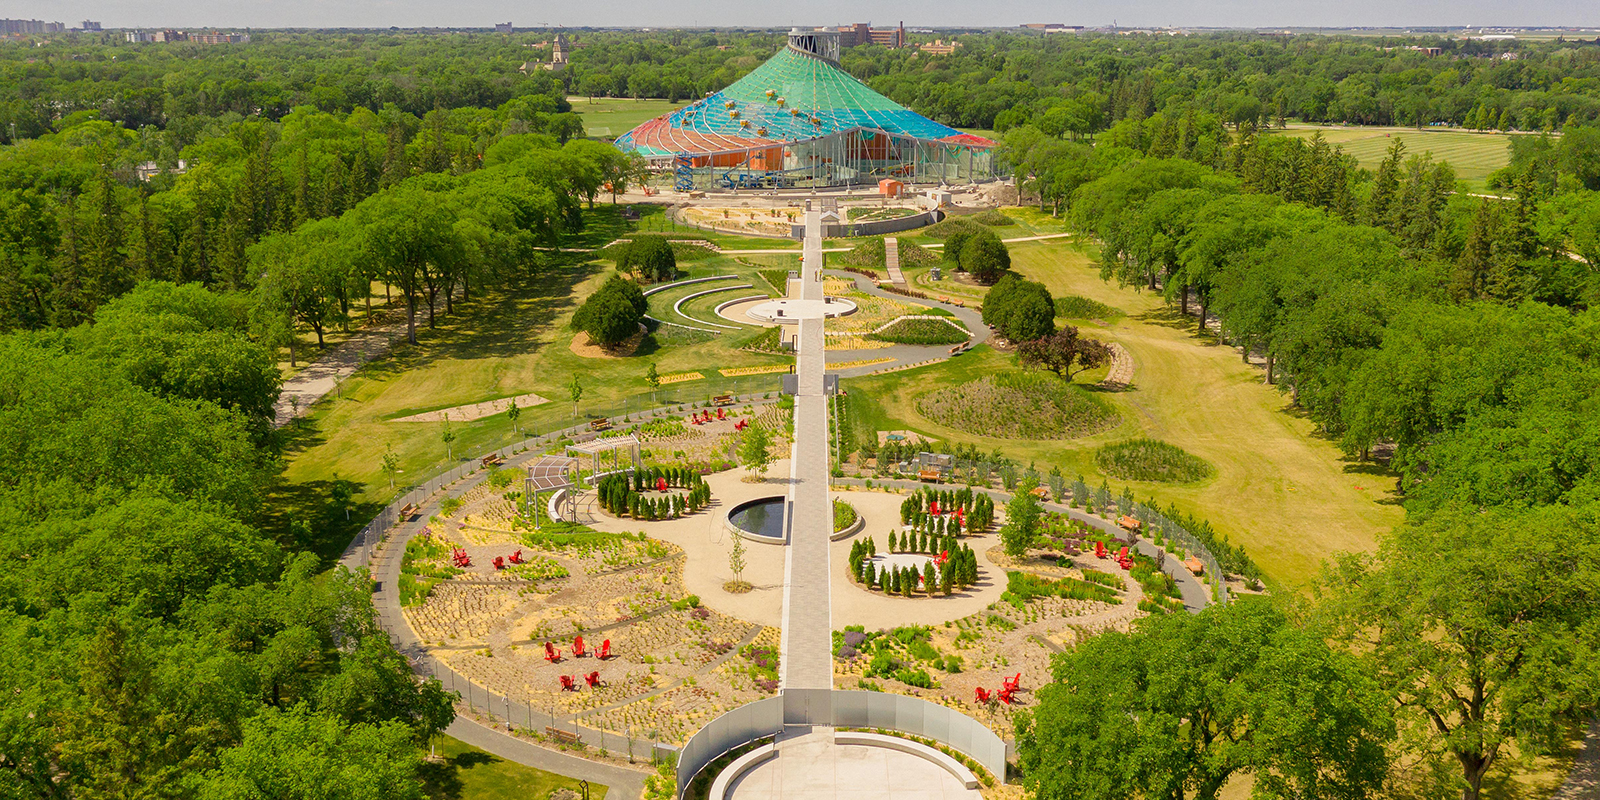 Gardens at The Leaf as seen from above (drone photo)